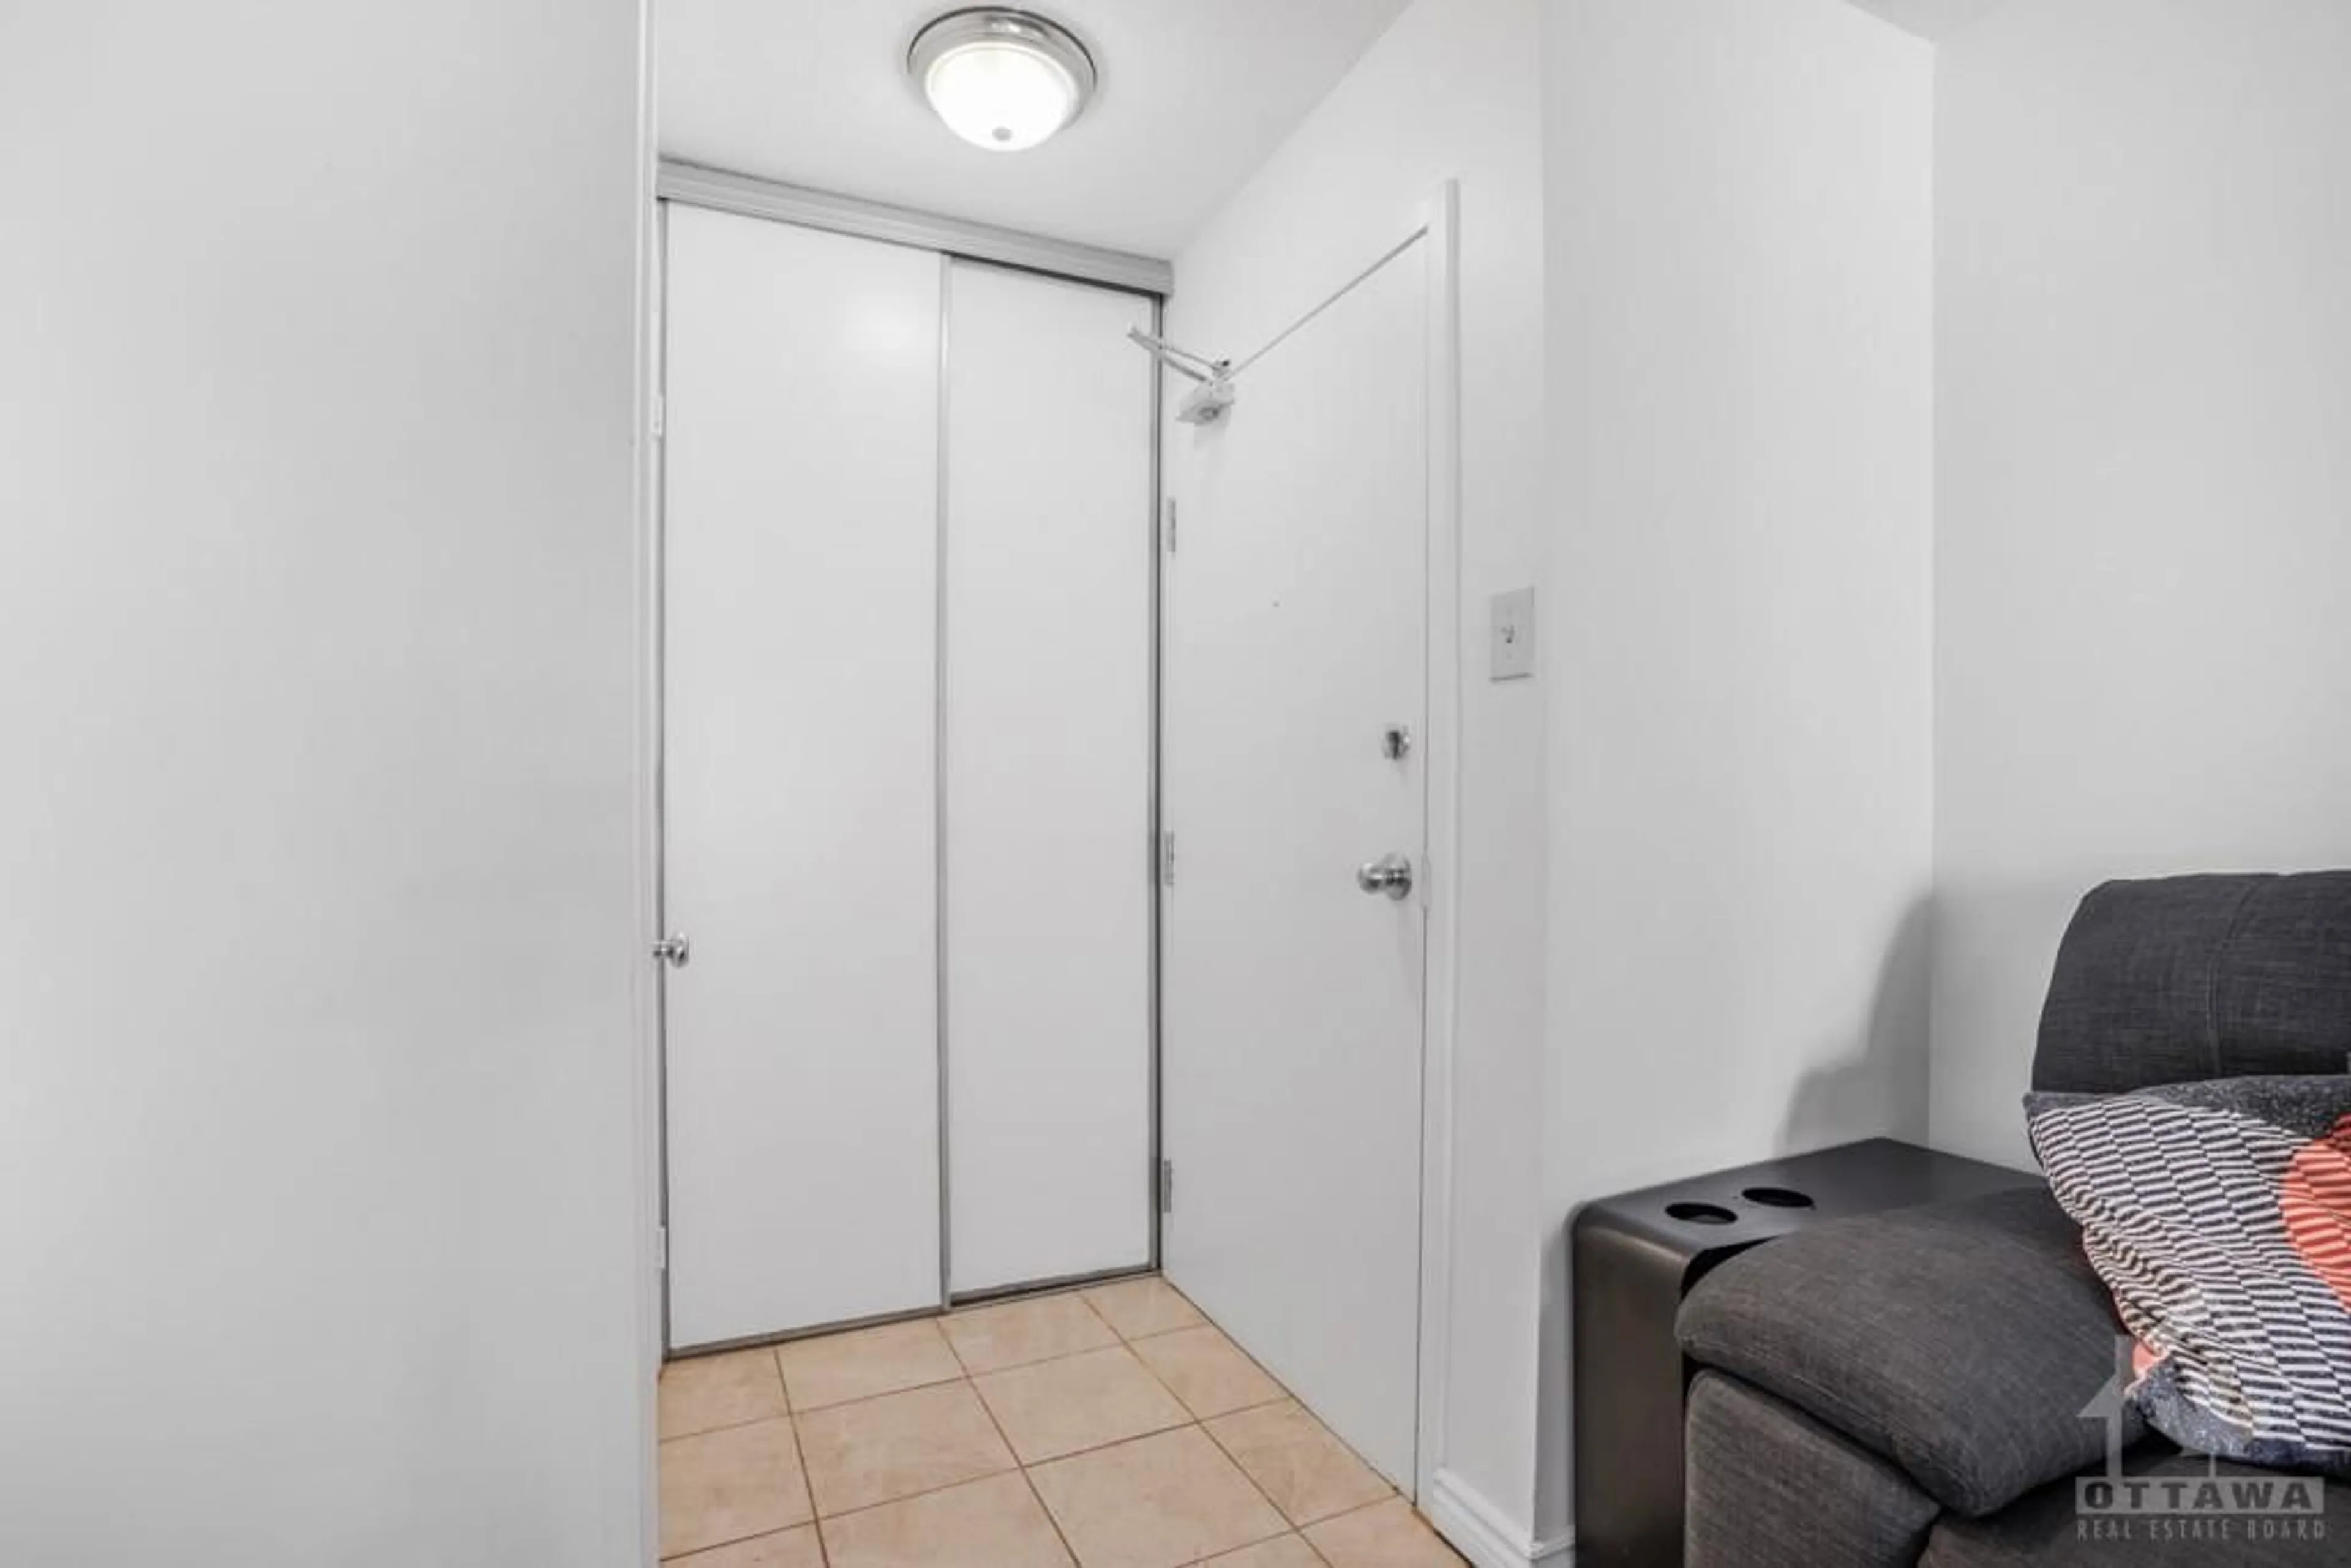 Indoor entryway for 270 BRITTANY Dr #203, Ottawa Ontario K1K 4M3